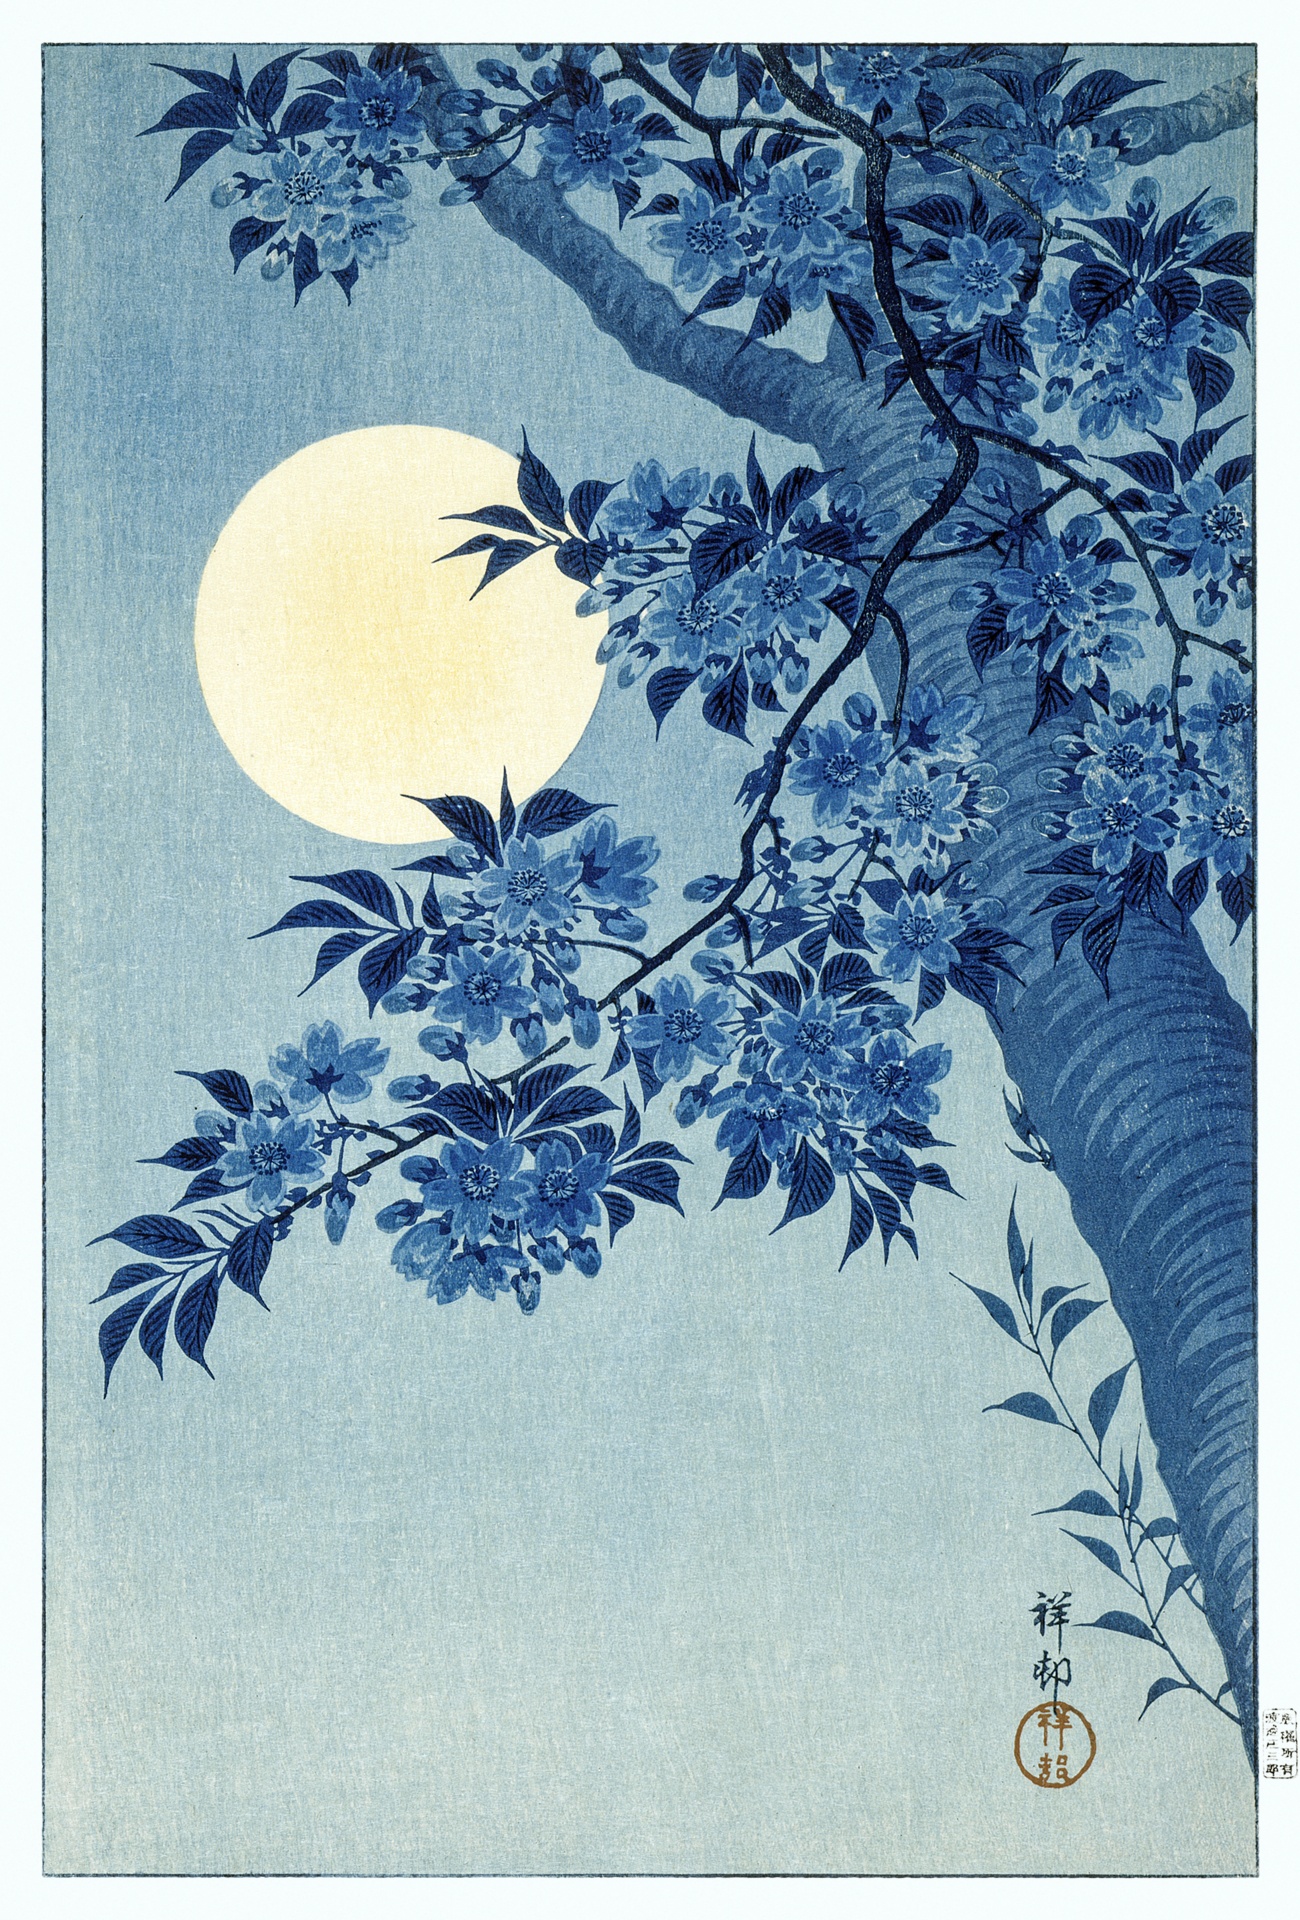 Moon Tree Branch Leaves Art Vintage Japan China Chinese Japanese Nature Publik Domain 18th 19th Century Vintage 1900 Old Antique Illustration Painted Painting Poster Print